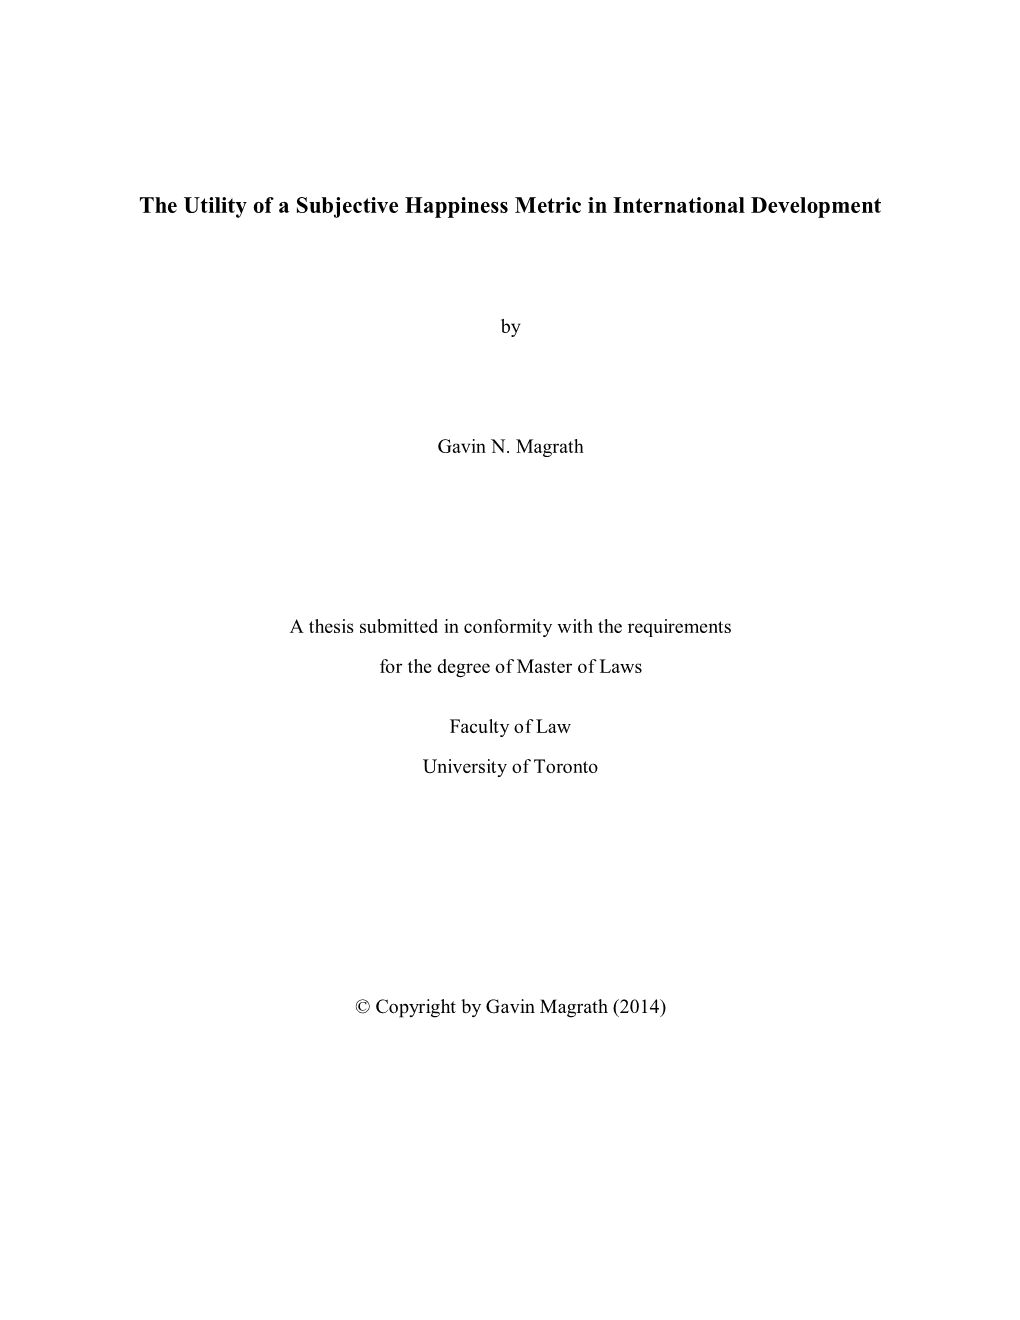 The Utility of a Subjective Happiness Metric in International Development